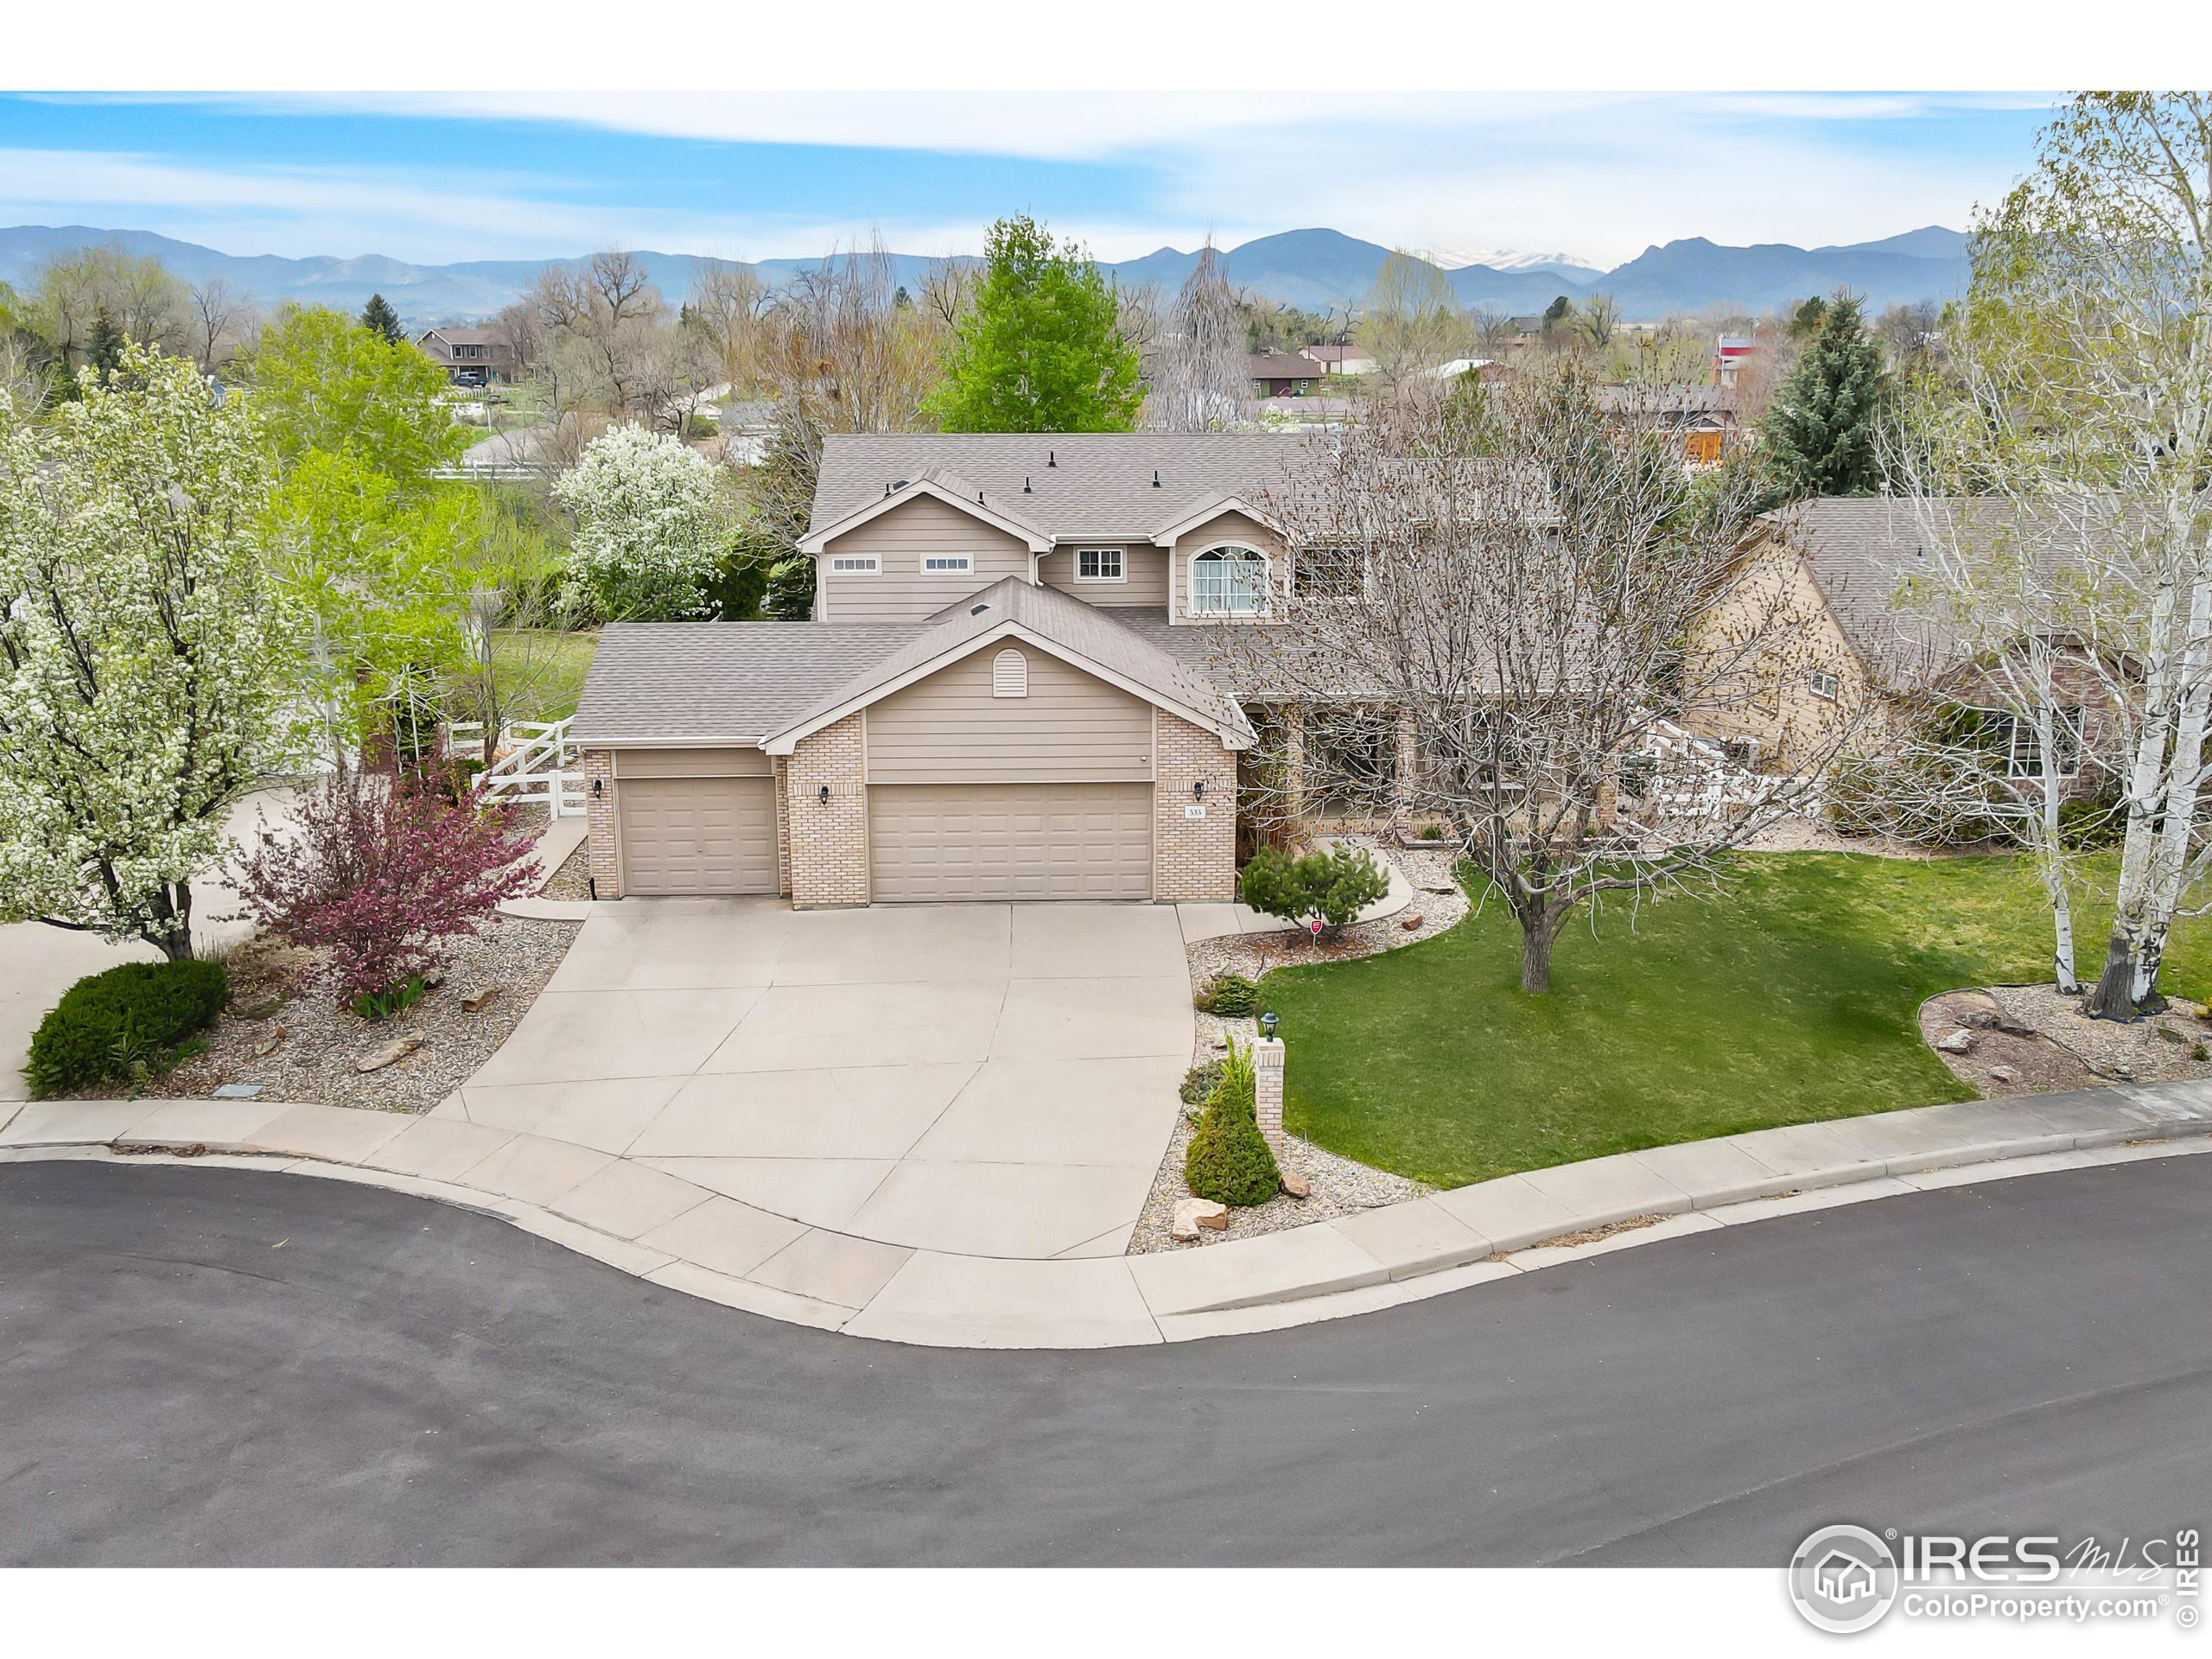 View Loveland, CO 80537 house